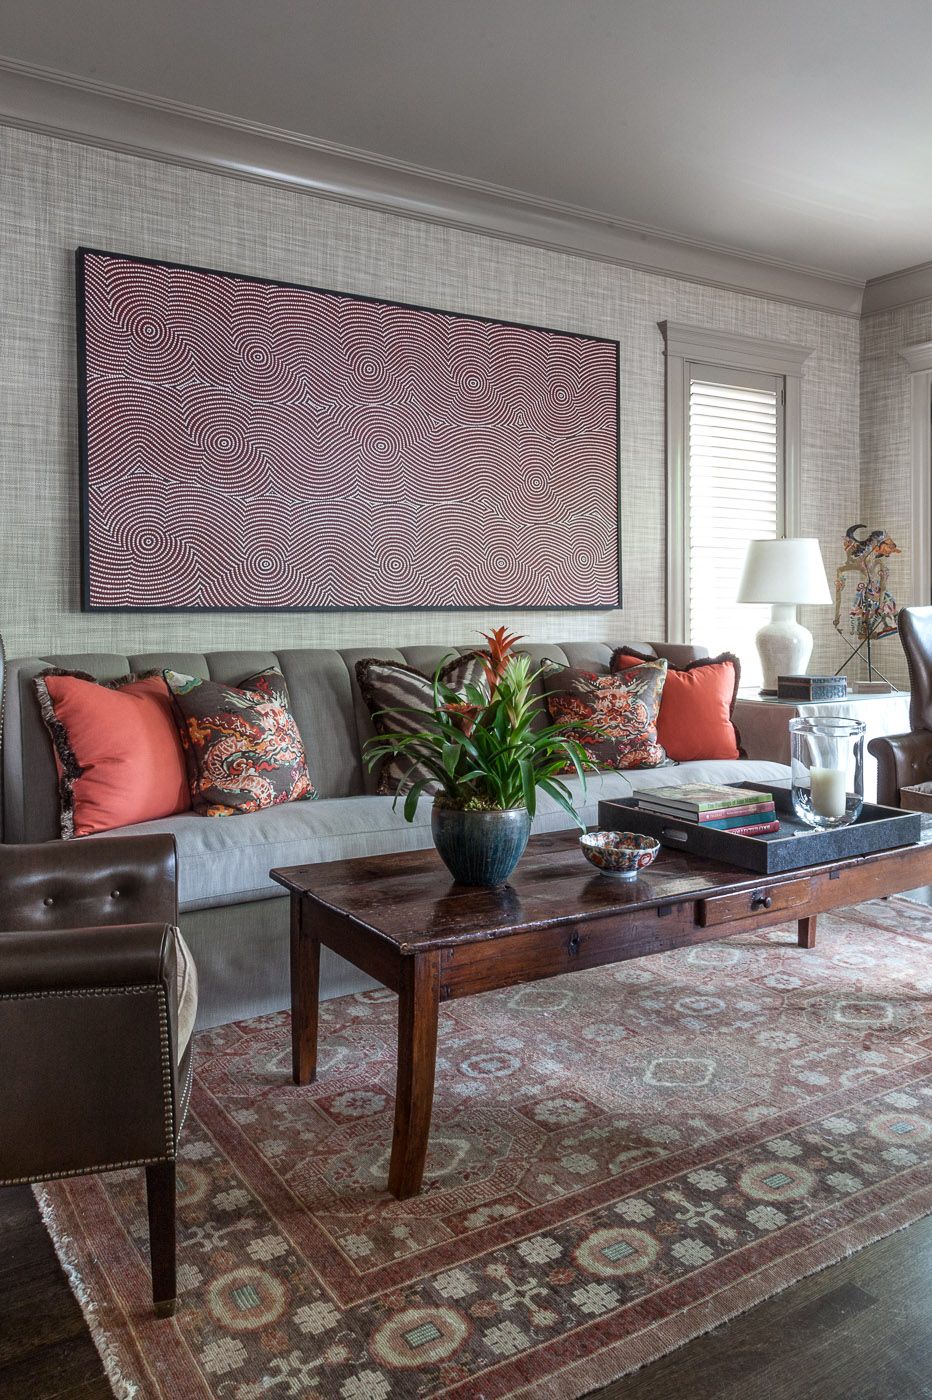 Living Coral Interiors - Pantone's Color of the Year Design Ideas